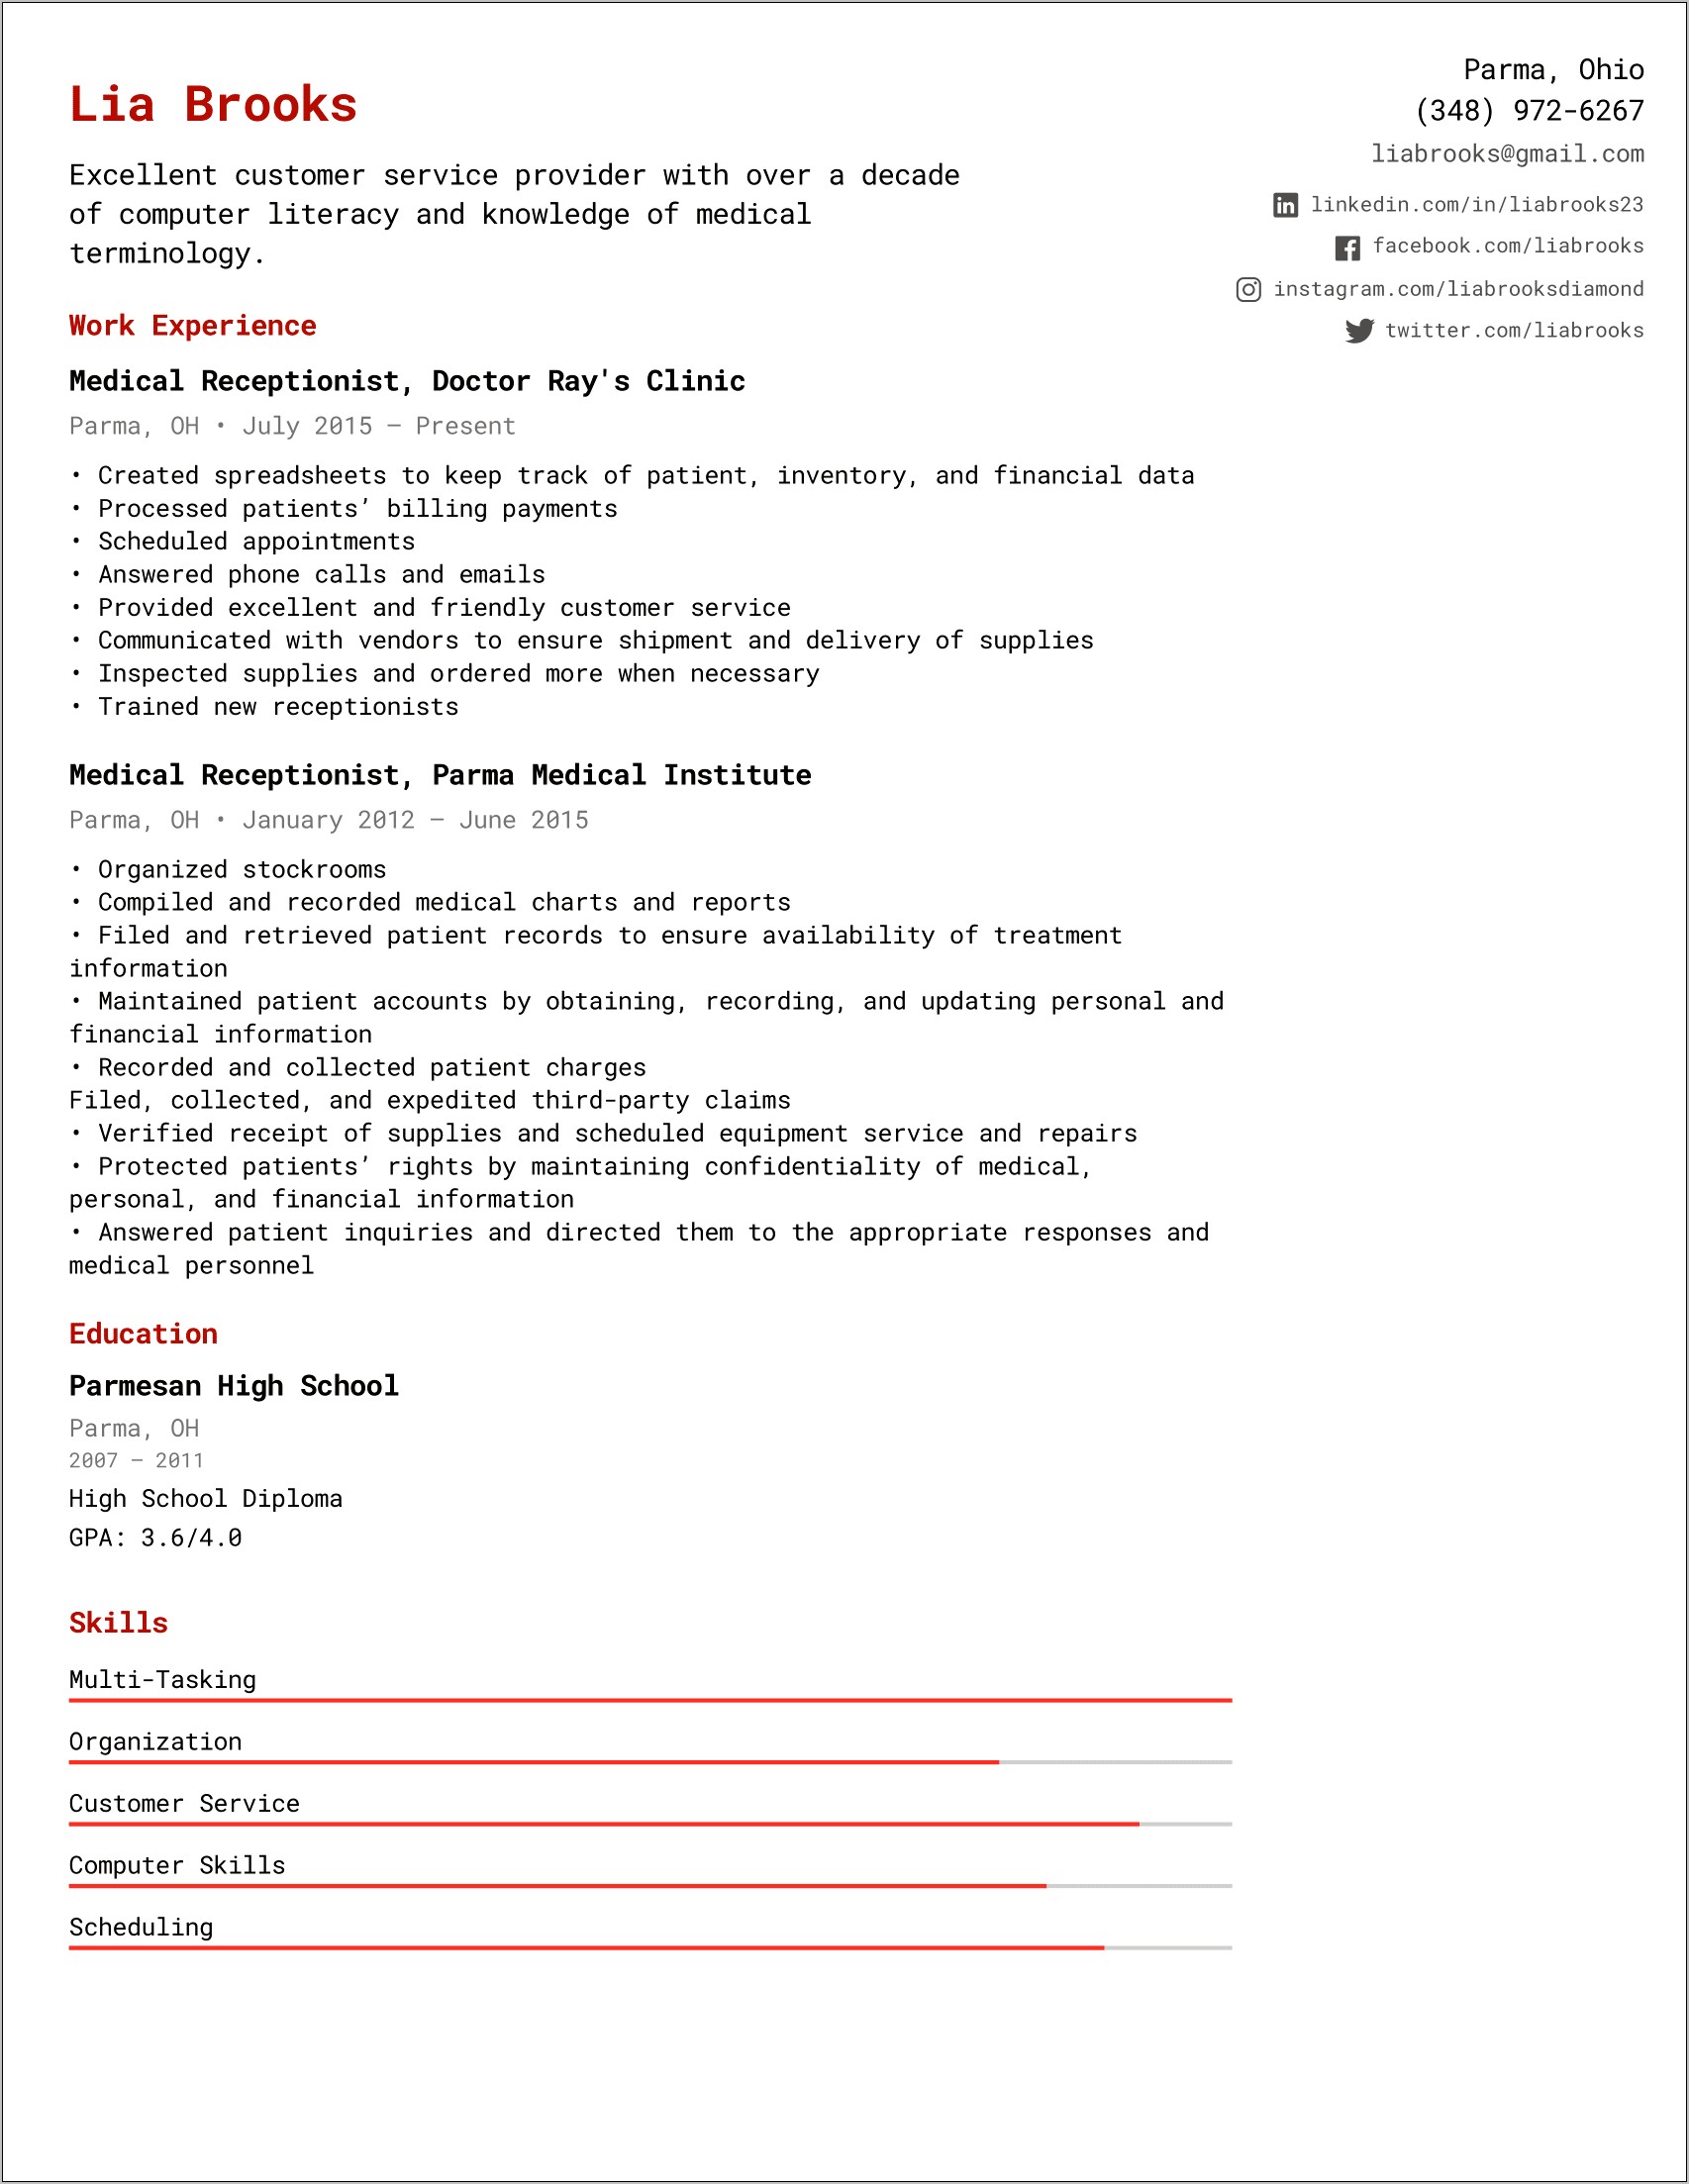 Sample Resumes For Ba In Healthcare Indeed.com